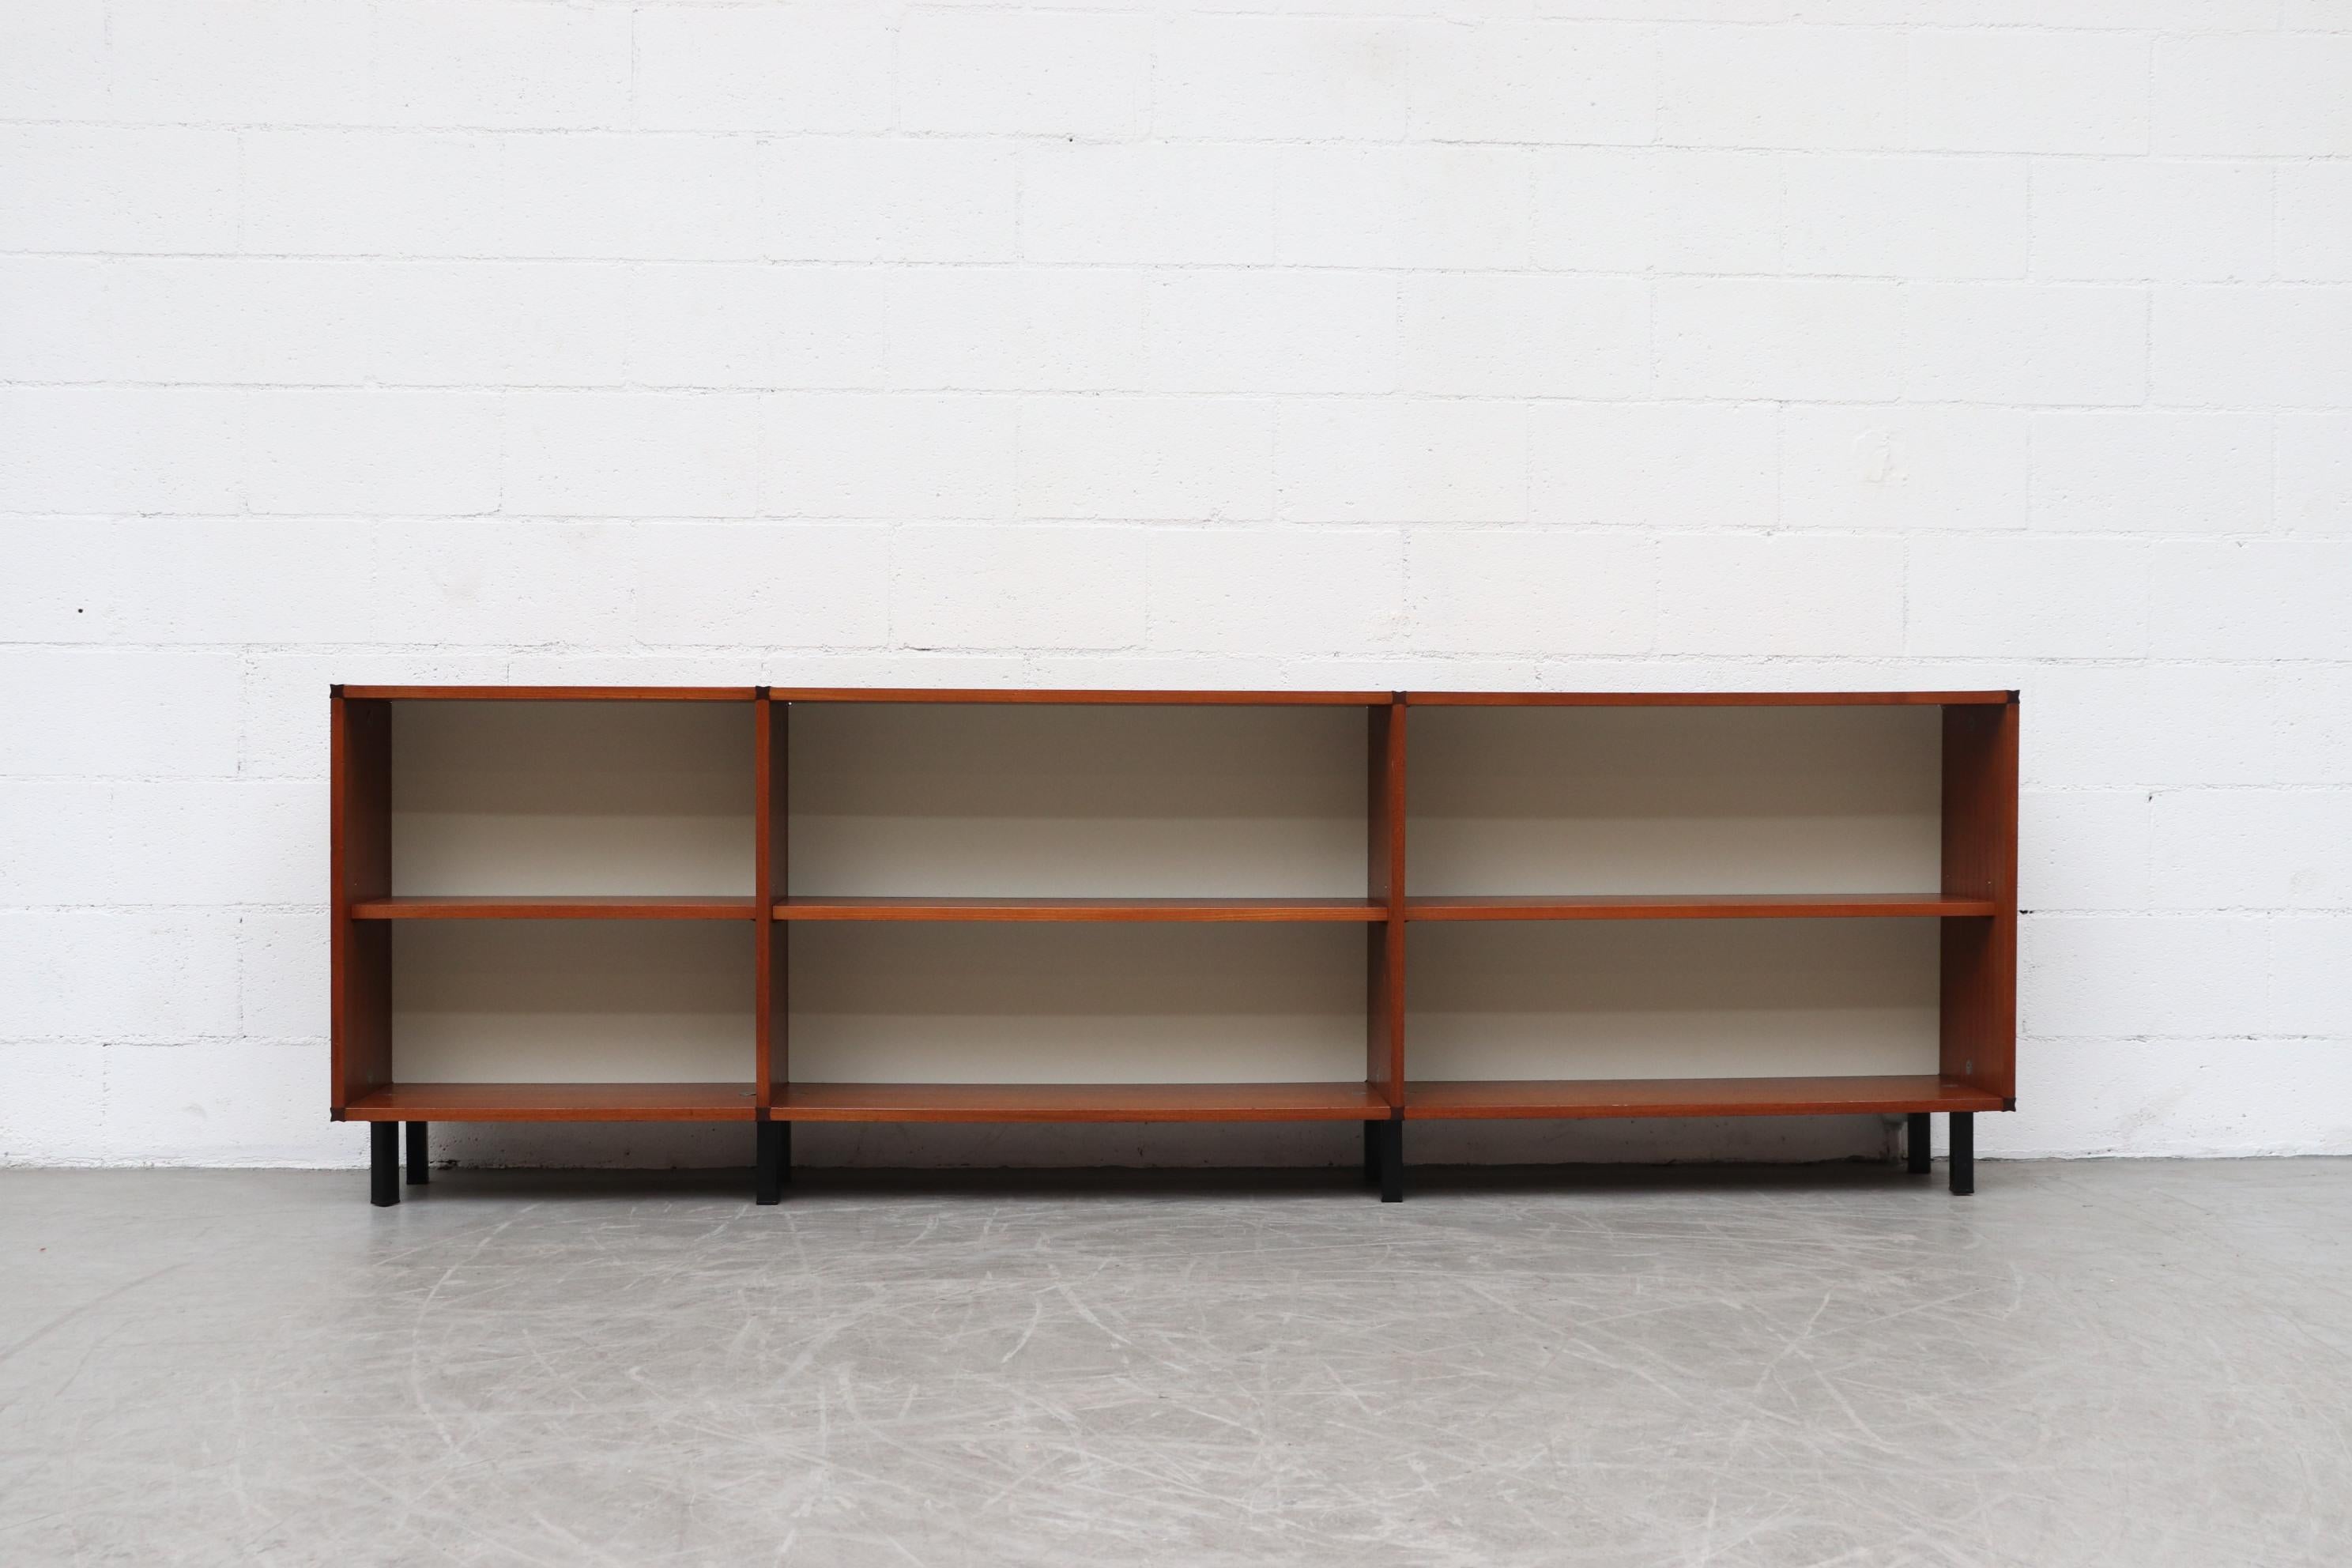 Pastoe 'Made to Measure' 3-section teak bookshelf with melamine backing and black enameled metal legs. Lightly refinished. In original condition with wear consistent with its age and use.